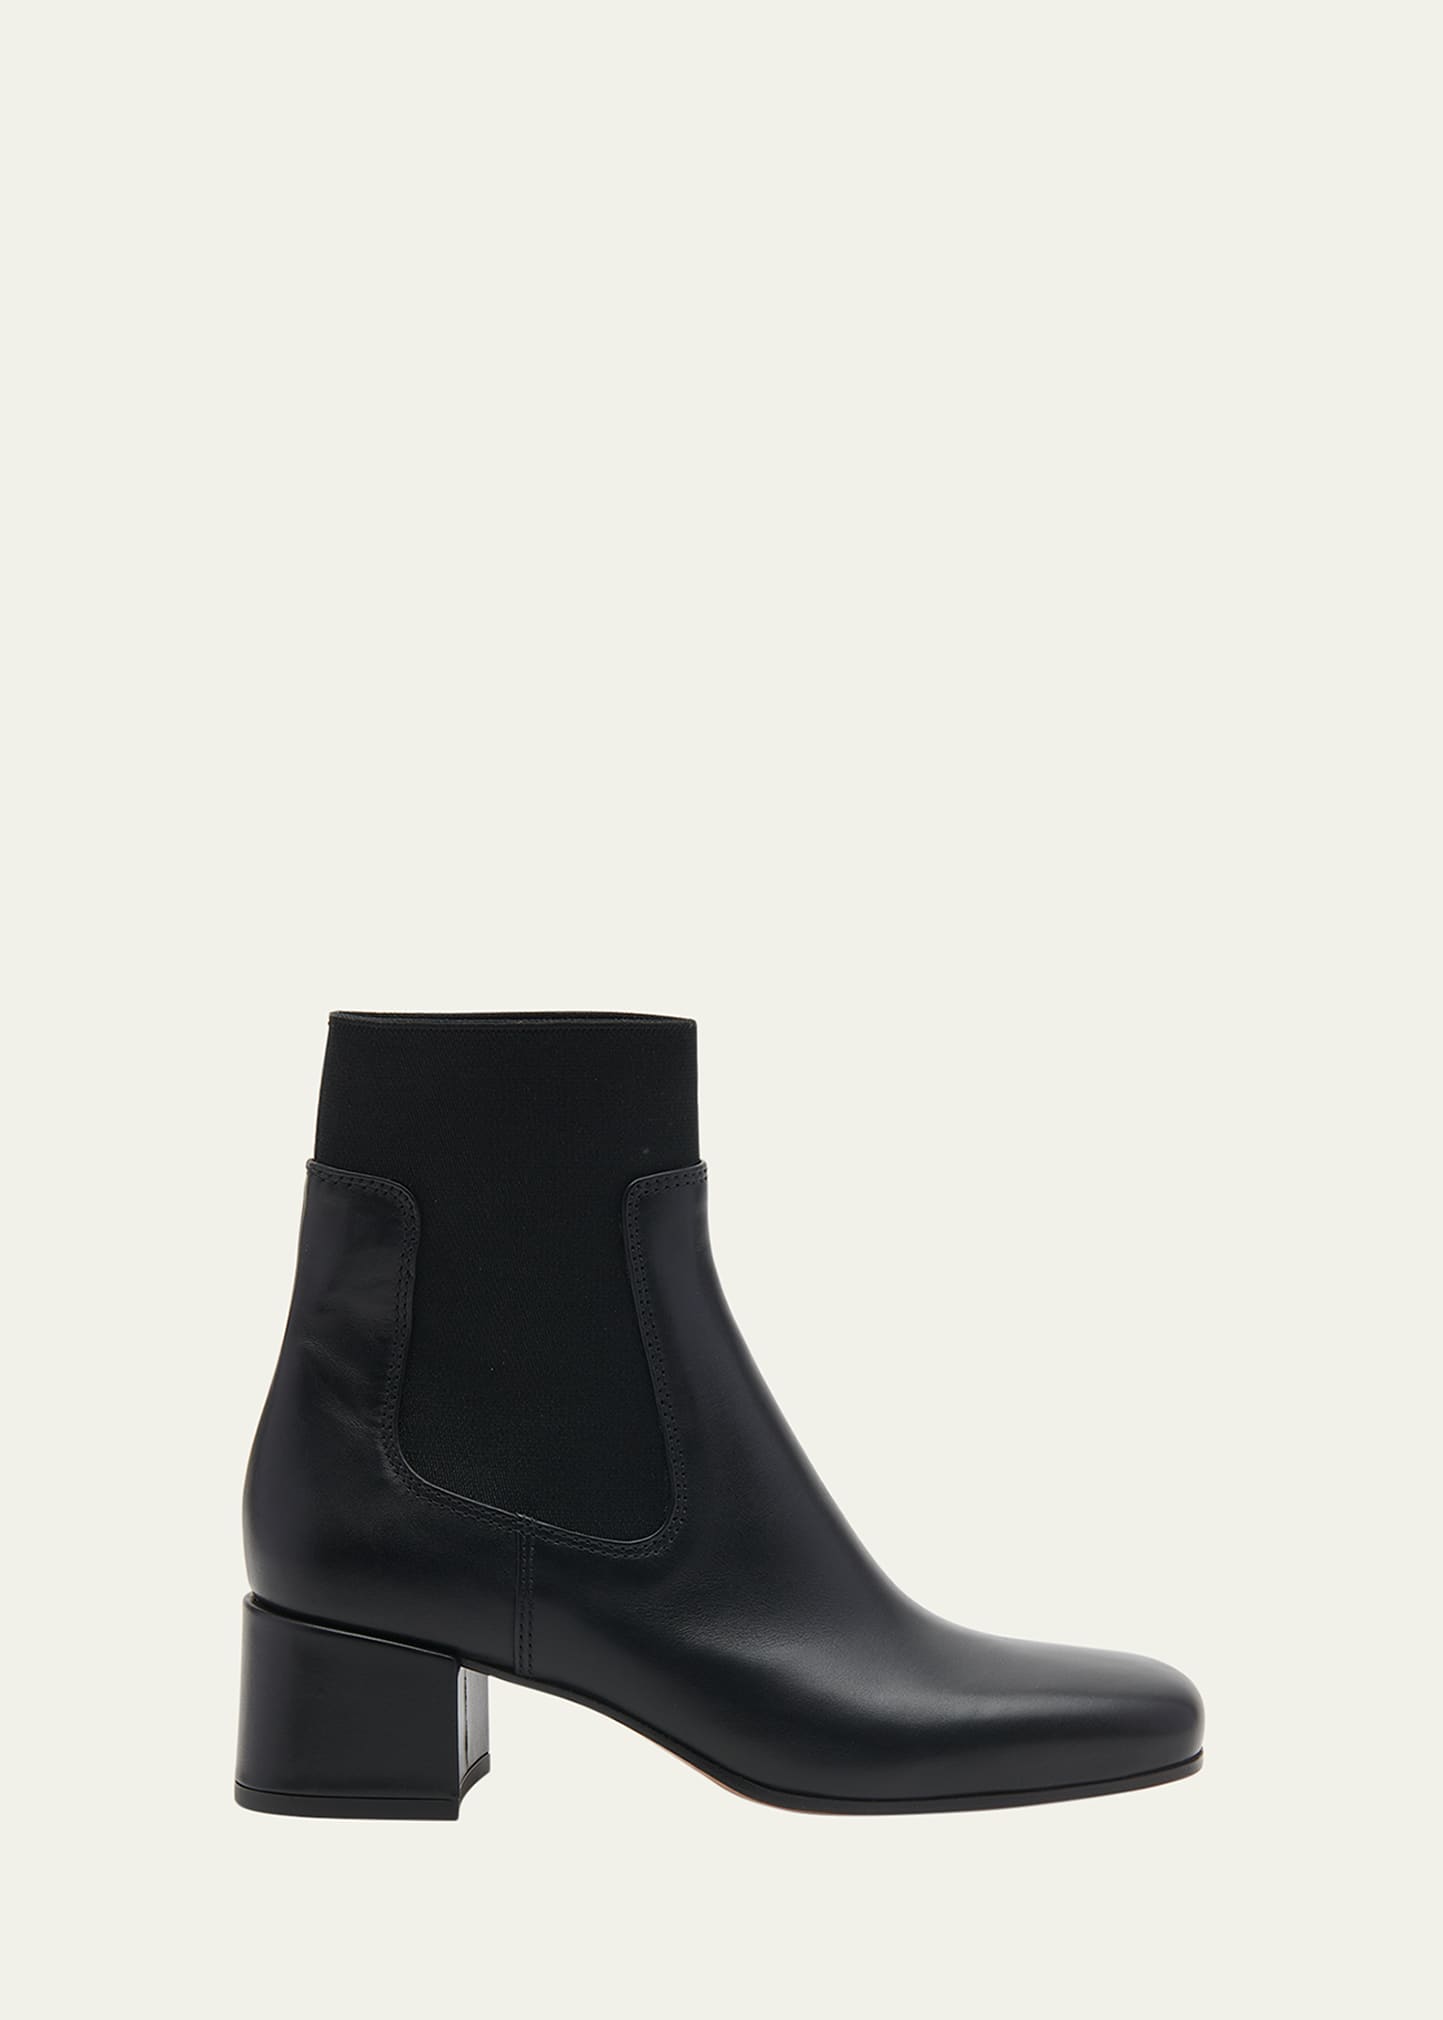 Gianvito Rossi Leather Knit Square-toe Chelsea Booties In Black